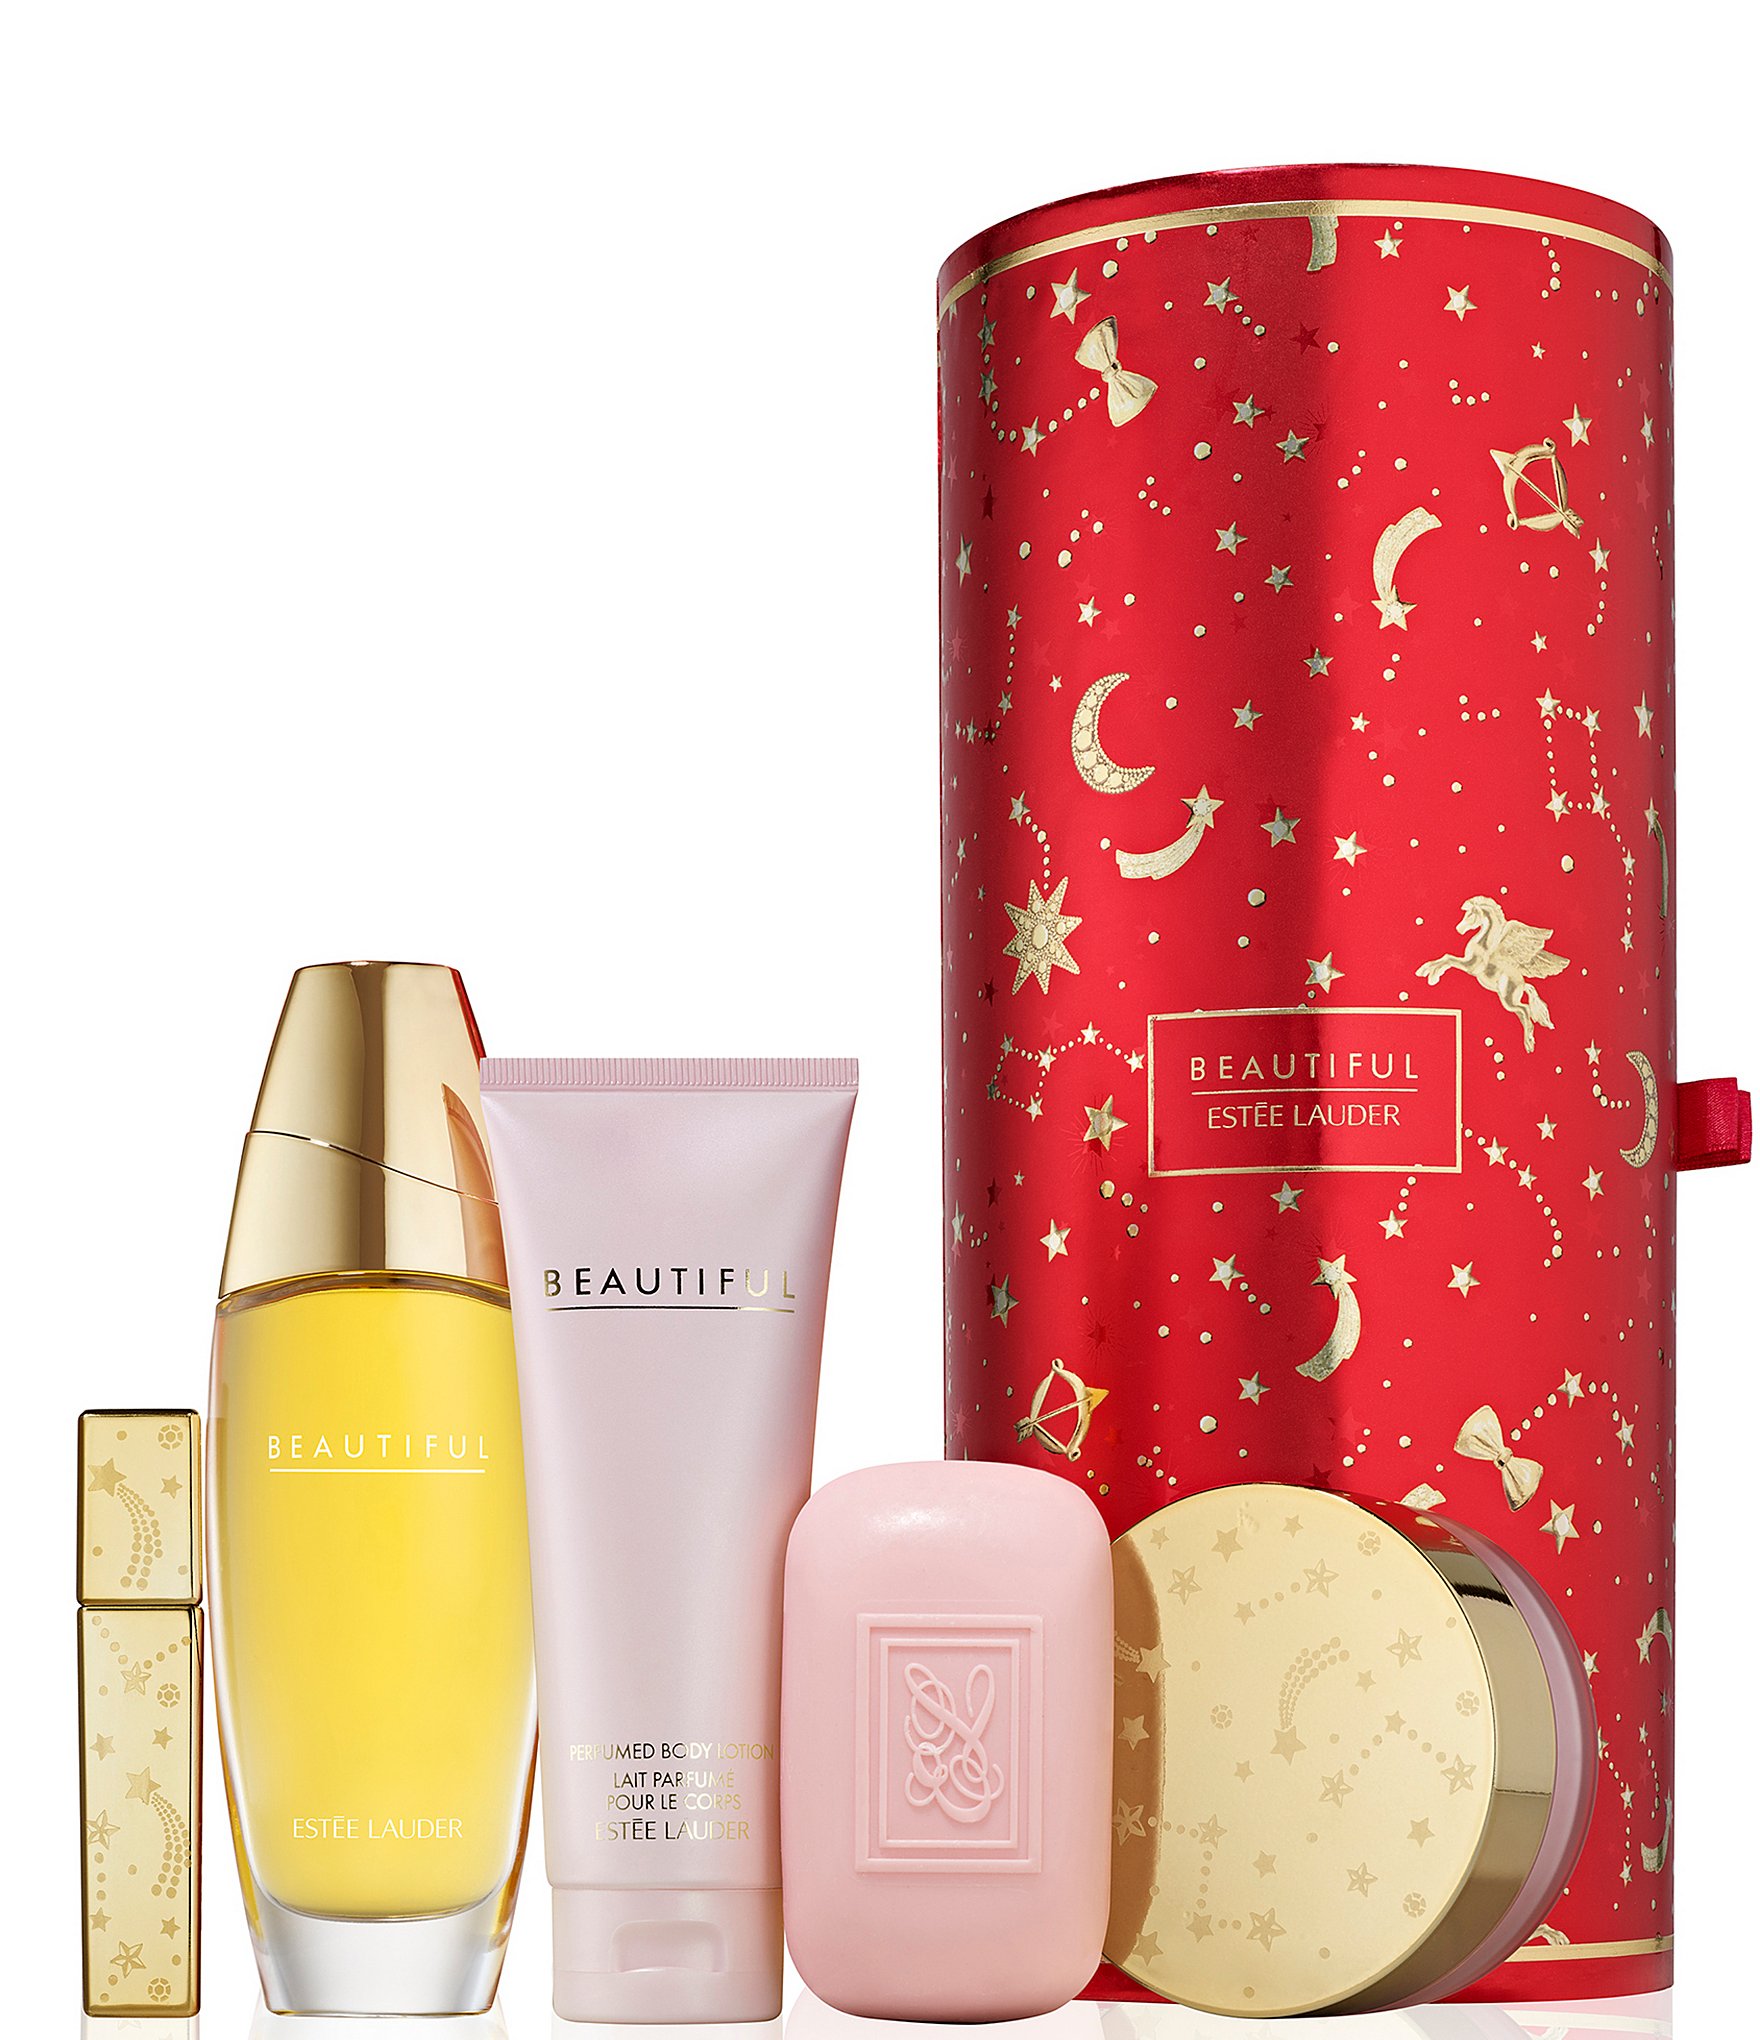 Discount Estee Lauder Products Including Perfume, Makeup & Skincare